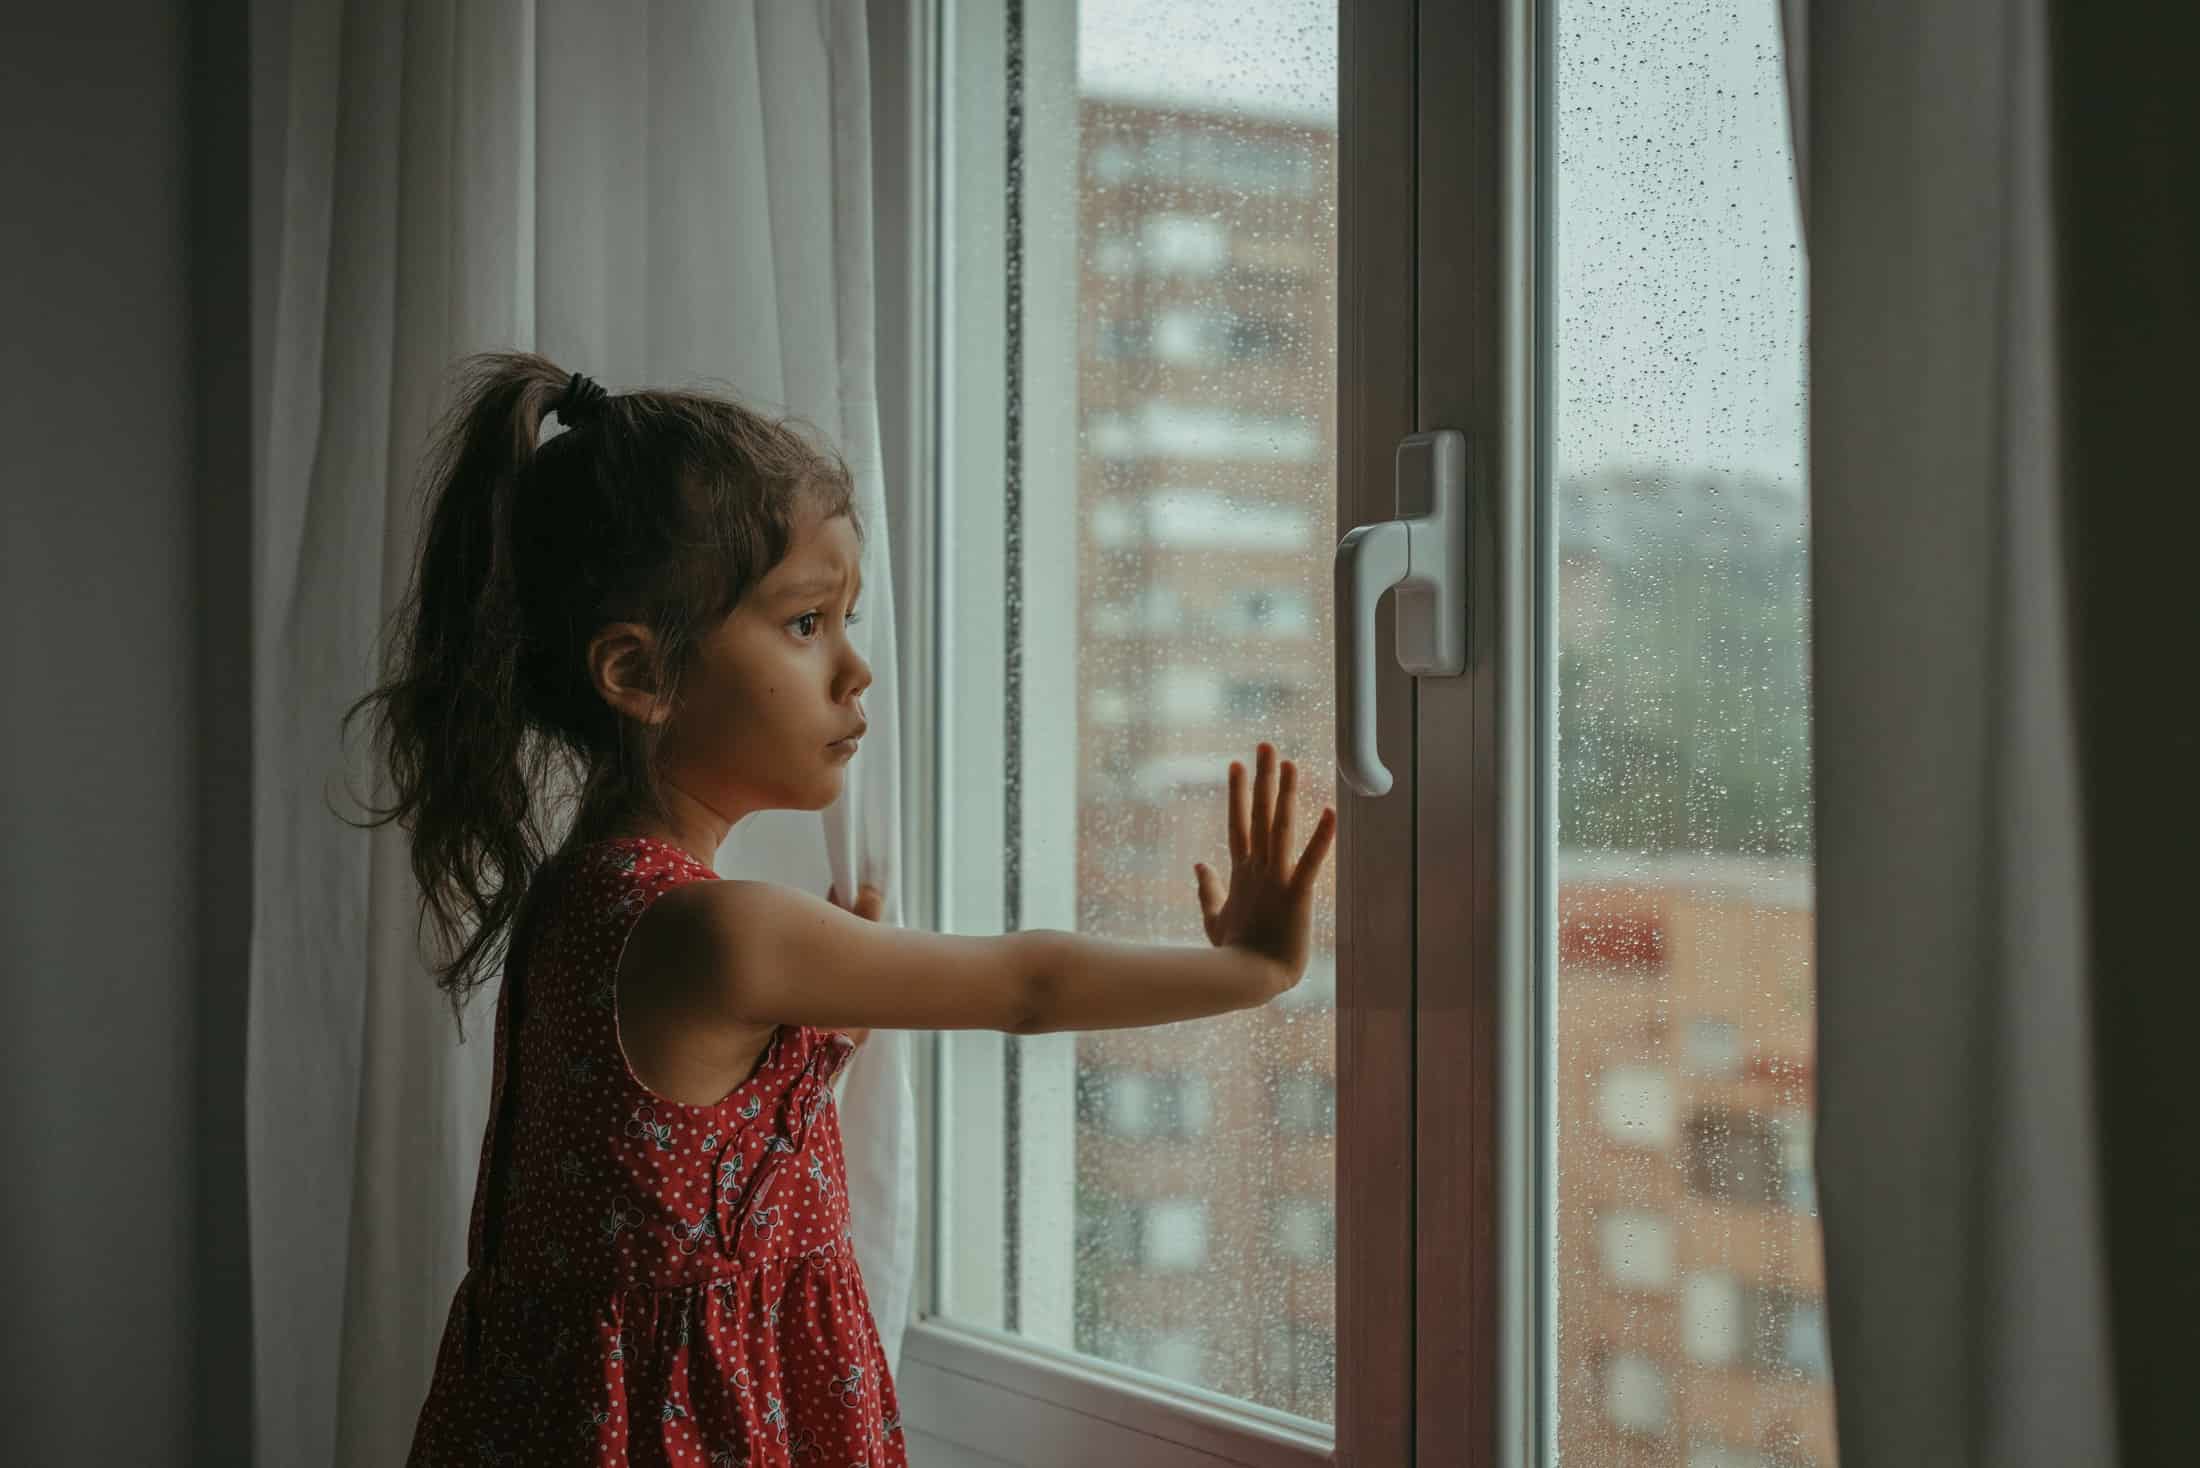 5 activities to fill your child’s time on rainy days